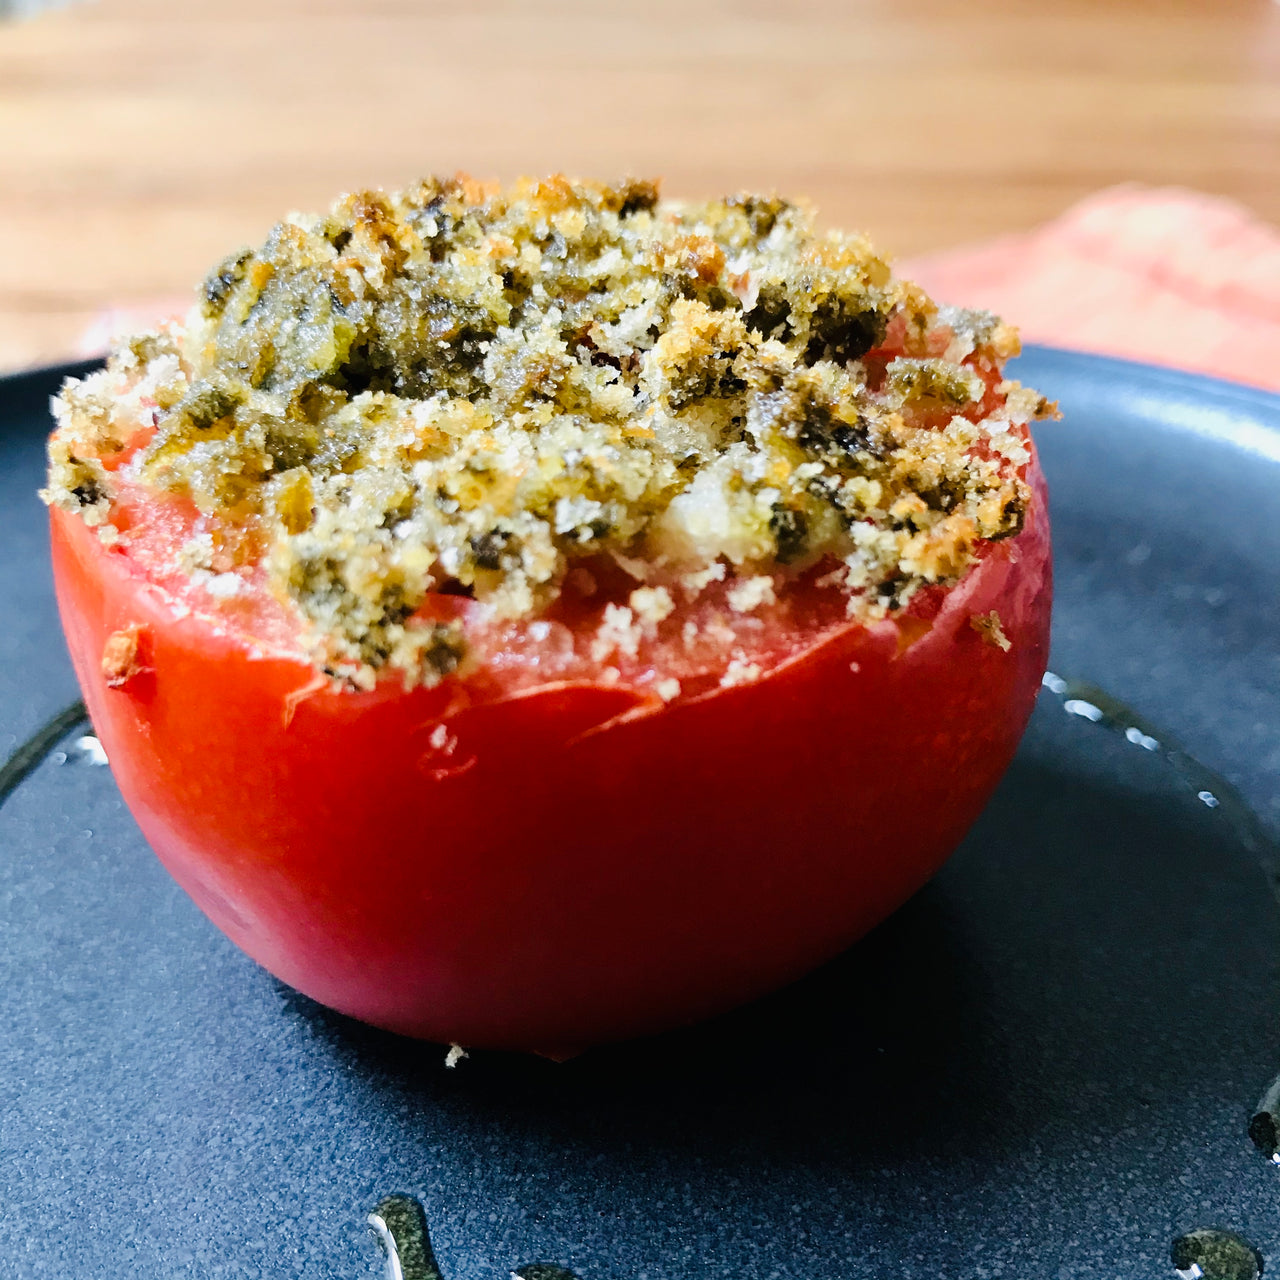 OVEN BAKED TOMATO FILLED WITH ERMES RICE AND CAPERS CRUMBLE